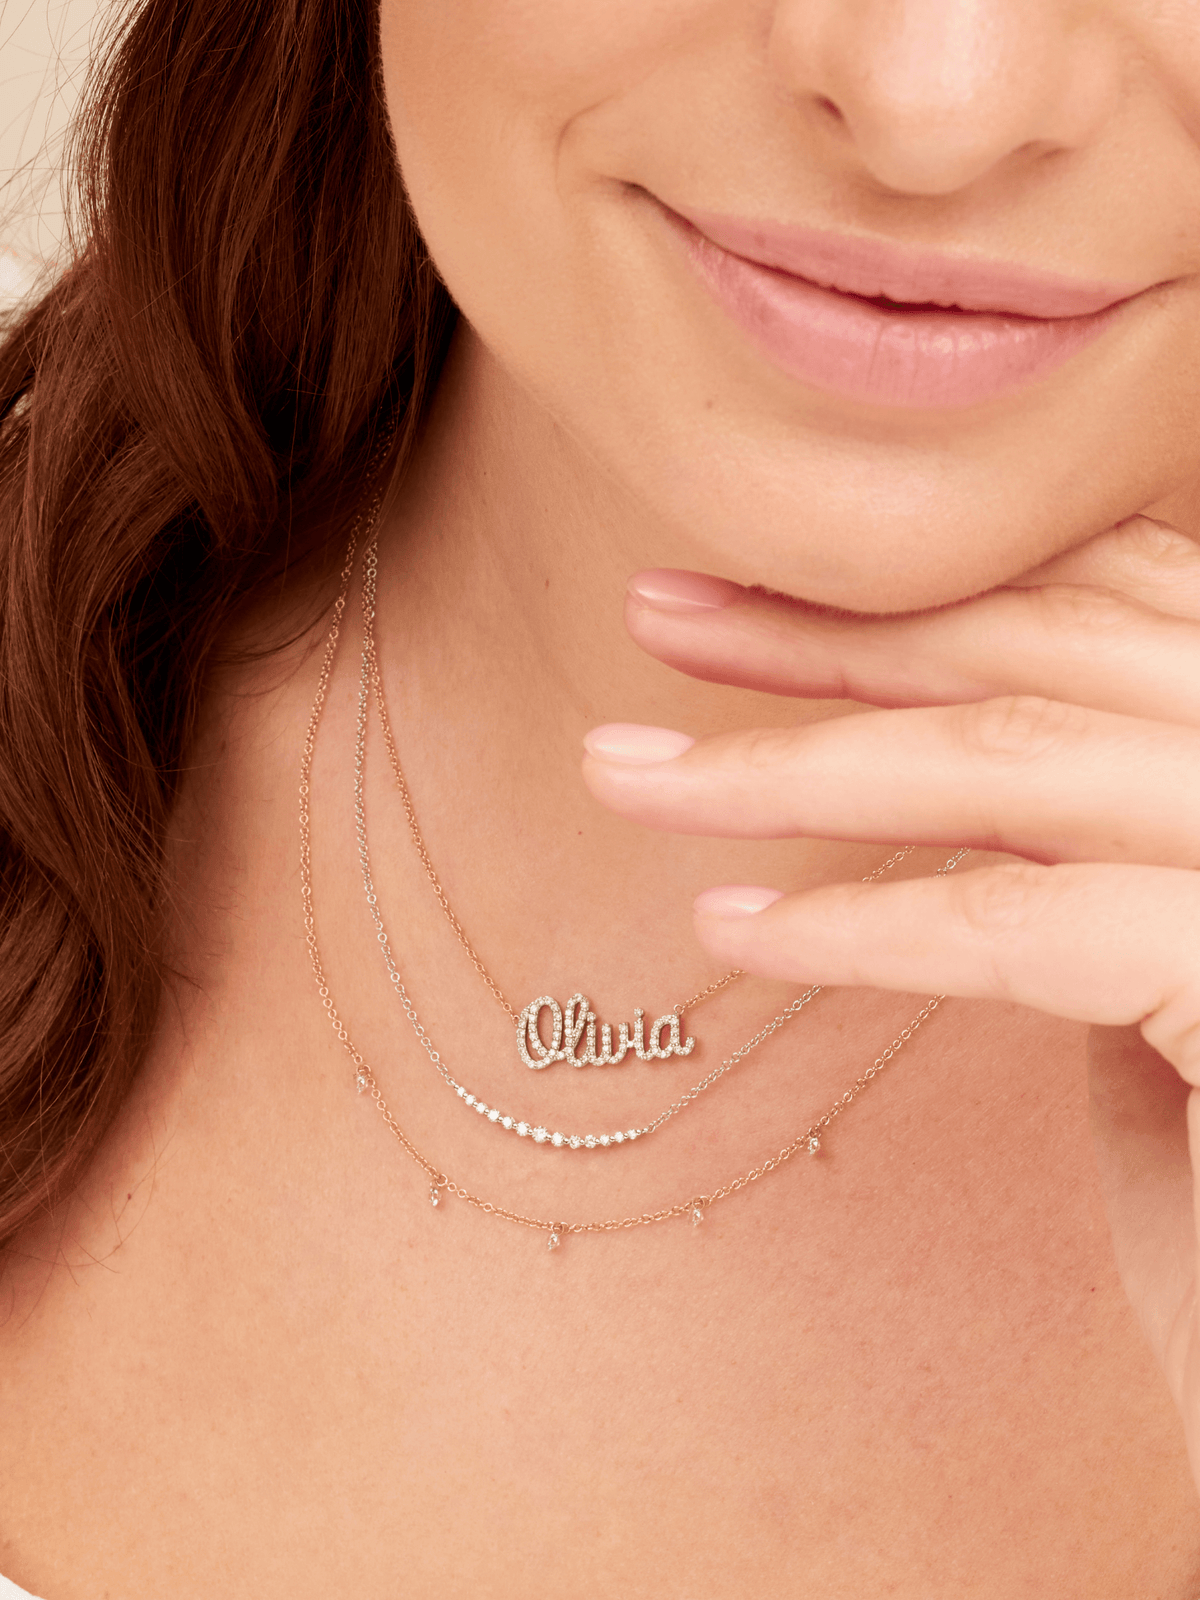 5 in 1 diamond necklace layered with chasing diamond necklace and diamond name necklace